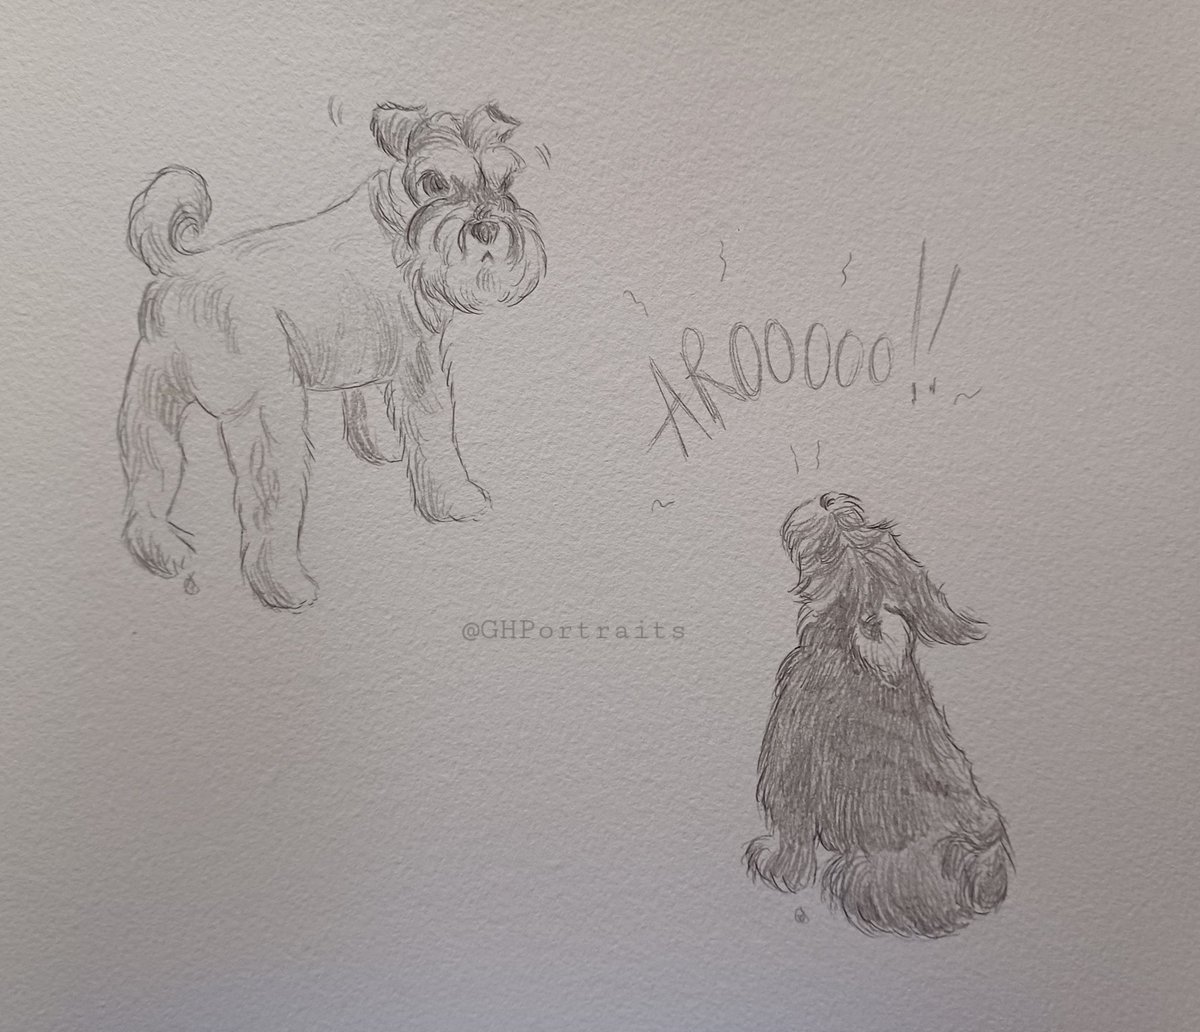 A little cartoon of my Lads🐶💕🐶 That time Brodie howled out of nowhere & Murray was shook!😆🐾 #ilovemydogs #dogsoftwitter #schnauzergang #dogsarelove #dogsarefamily #mydogsarecartoons 💕